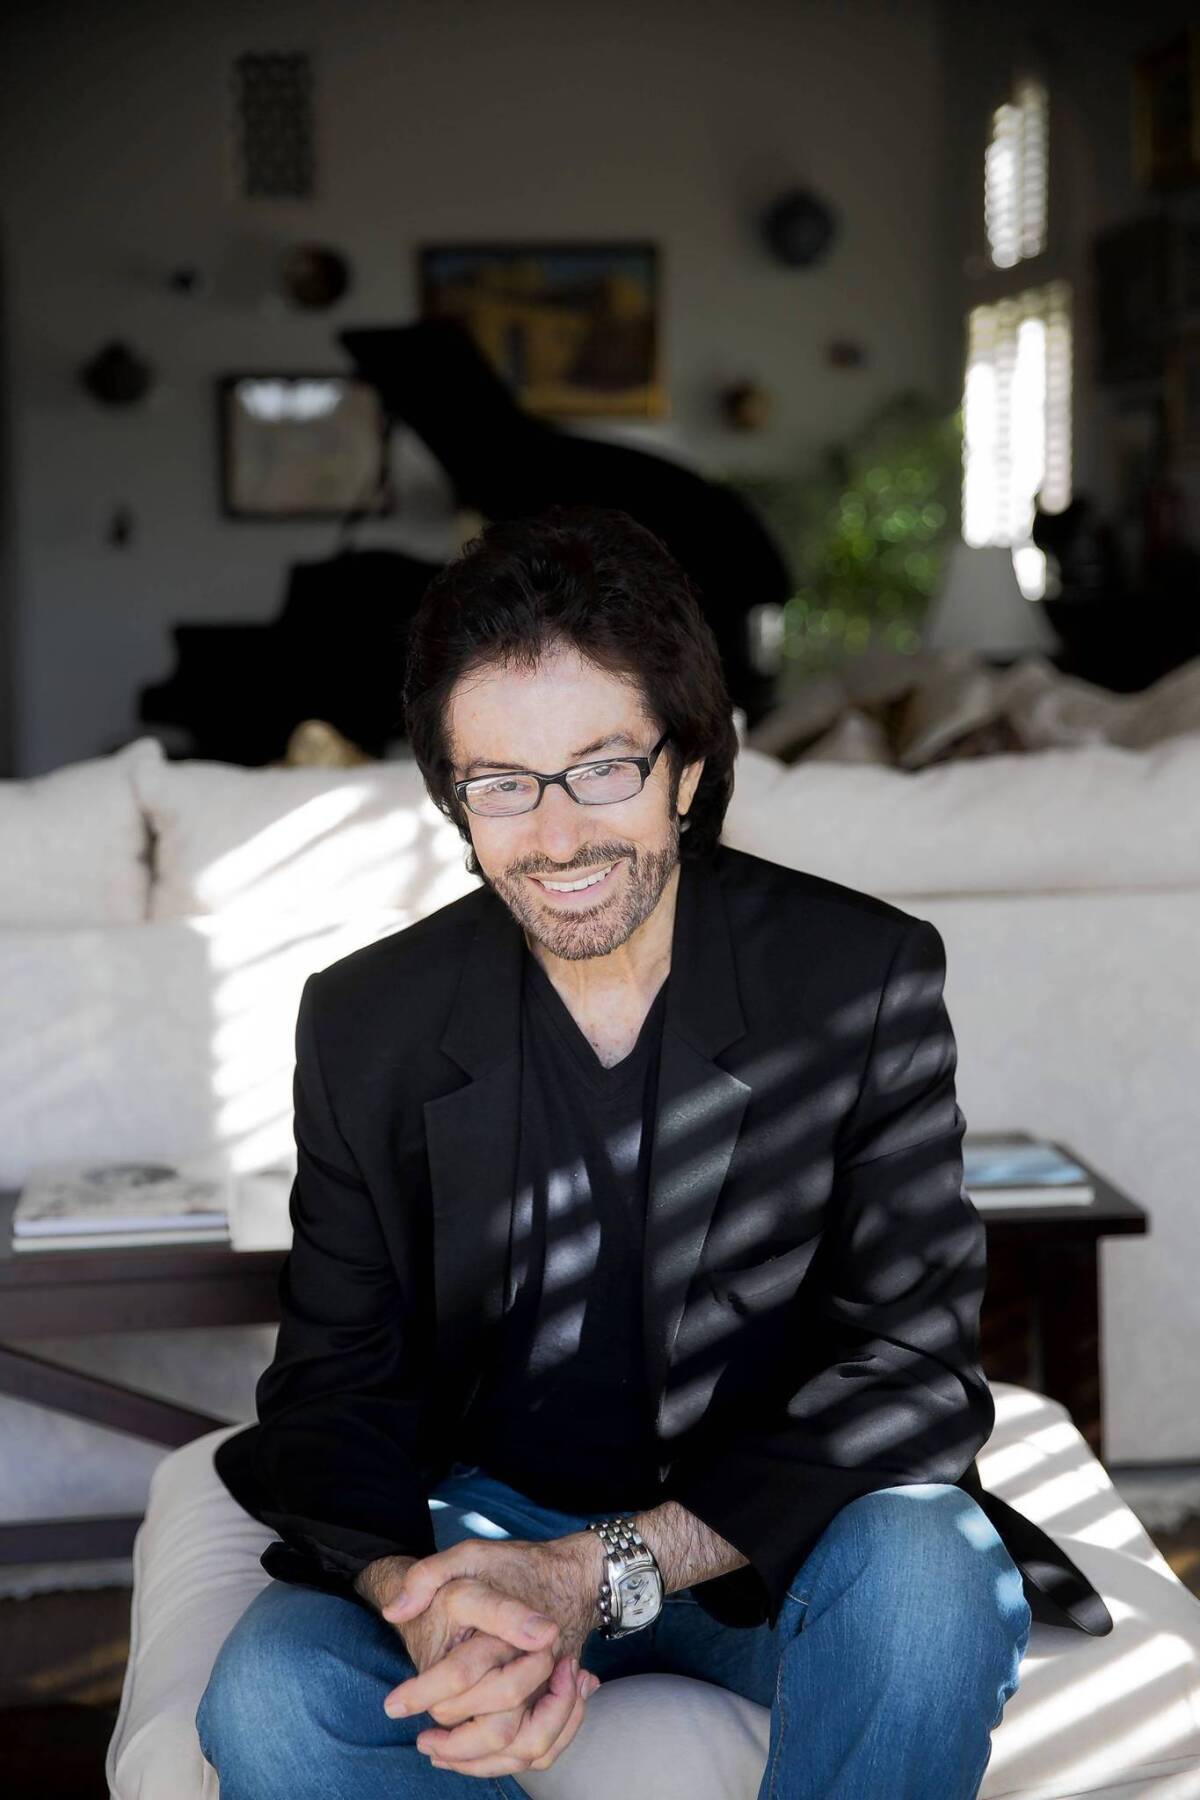 Actor George Chakiris won the supporting actor Oscar for his performance in "West Side Story."